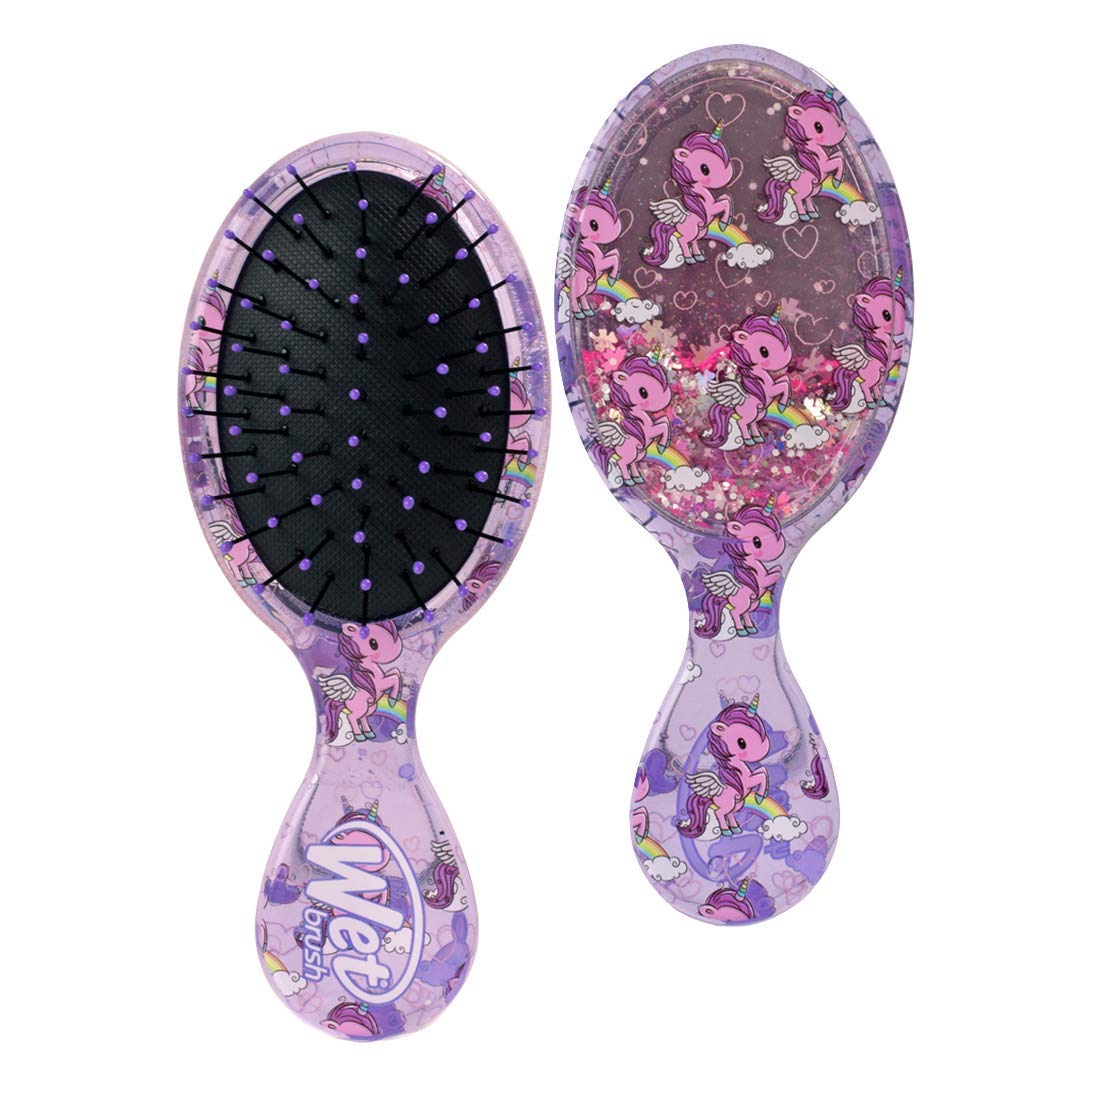 ''Wet Brush HAIR Liquid Kitty And Holographic Confetti Mini Detangler Protects Against Split Ends and